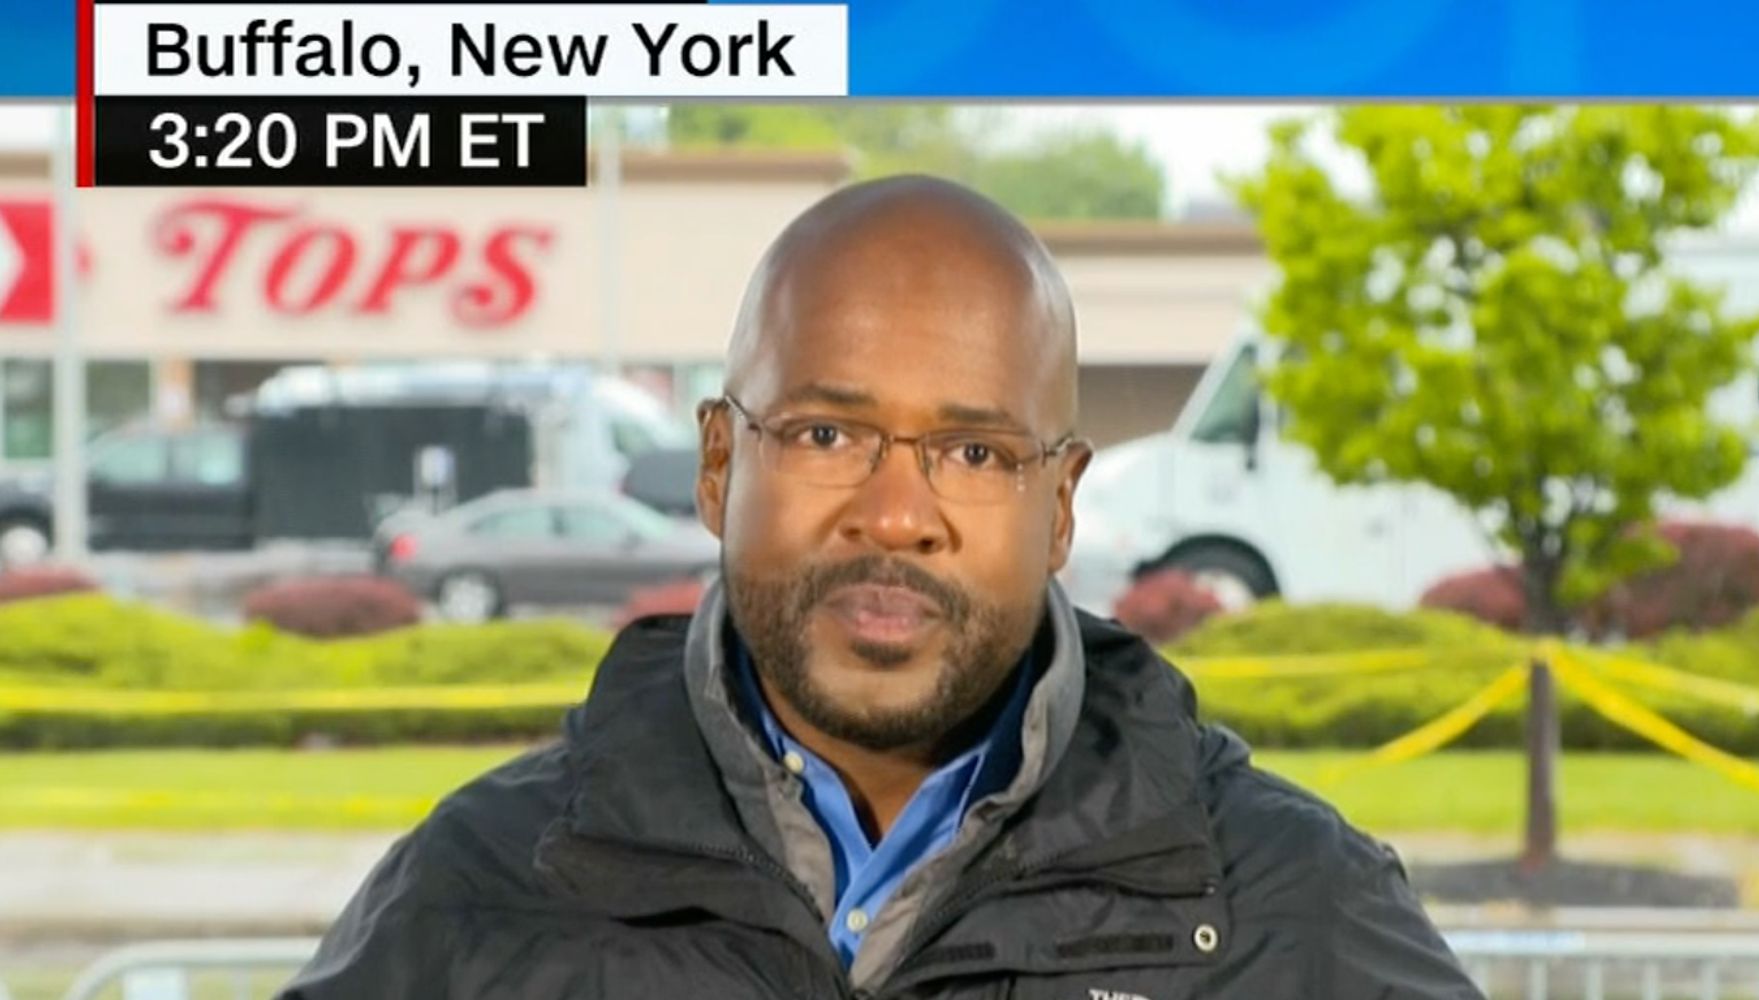 CNN Correspondent Breaks Down At Buffalo Shooting Scene: ‘Nothing Will Change’